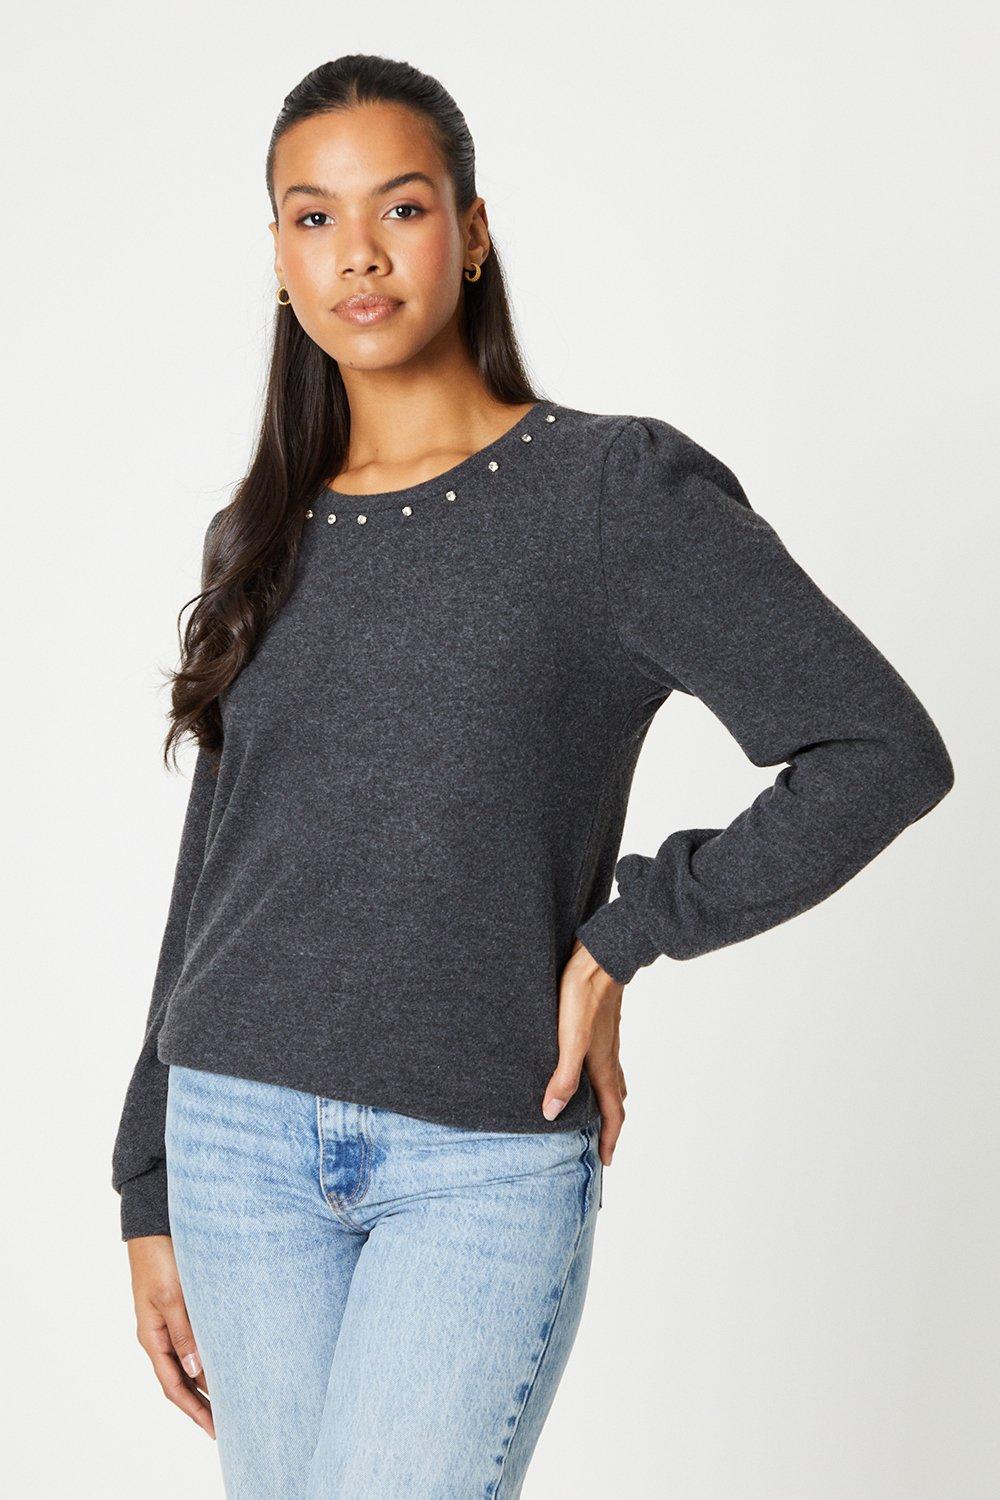 Women's Tall Diamonte Puff Sleeve Brushed Long Sleeve Top - charcoal - M